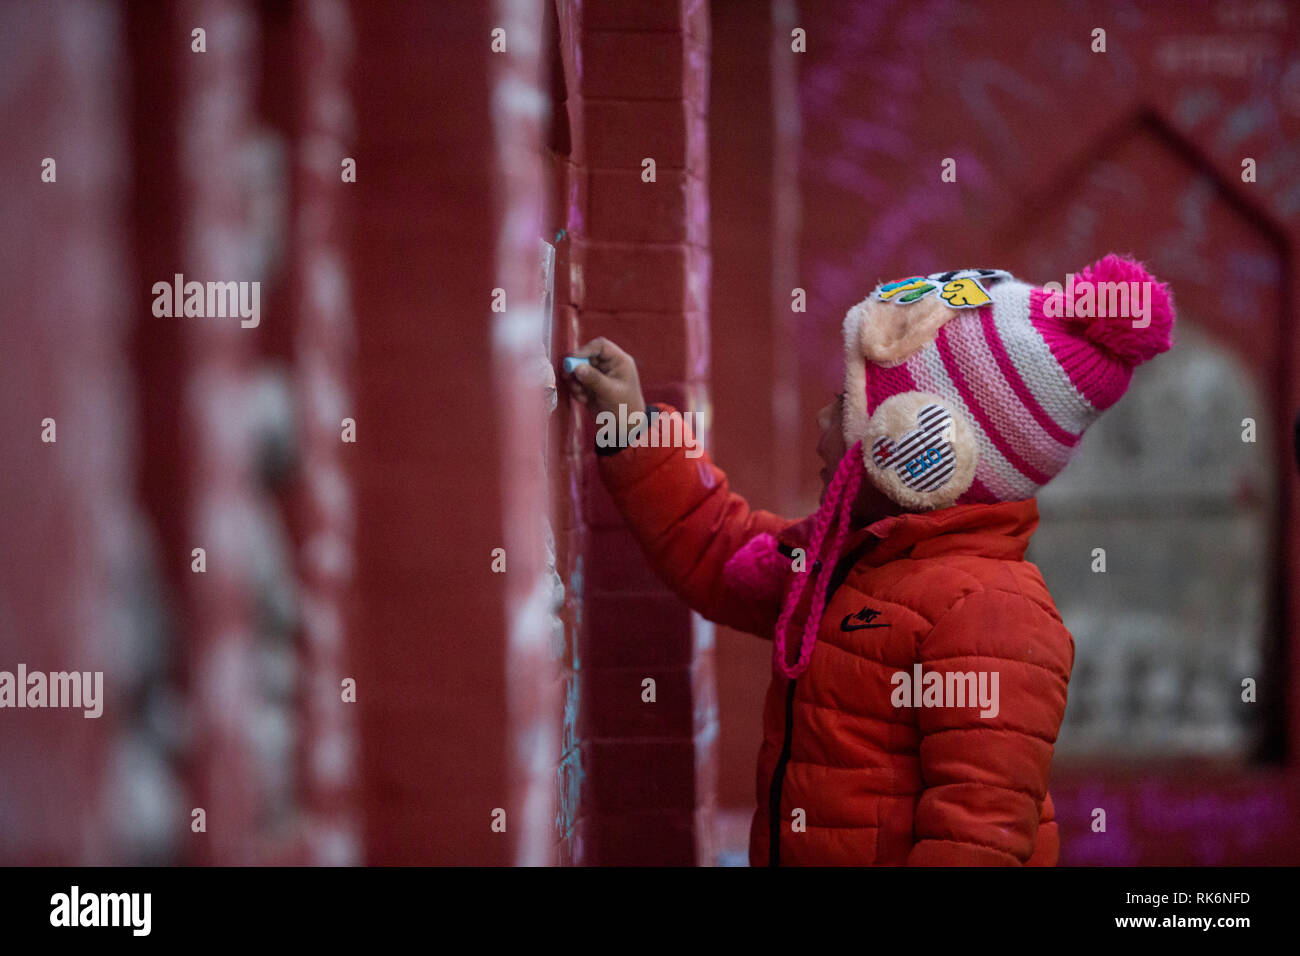 Kathmandu, Nepal. 10th Feb, 2019. A kid writes on a wall at Saraswati Temple during Basanta Panchami early morning in Kathmandu, Nepal, on Feb. 10, 2019. Saraswati, Goddess of Knowledge, is worshipped on this day by the students. Credit: Sulav Shrestha/Xinhua/Alamy Live News Stock Photo